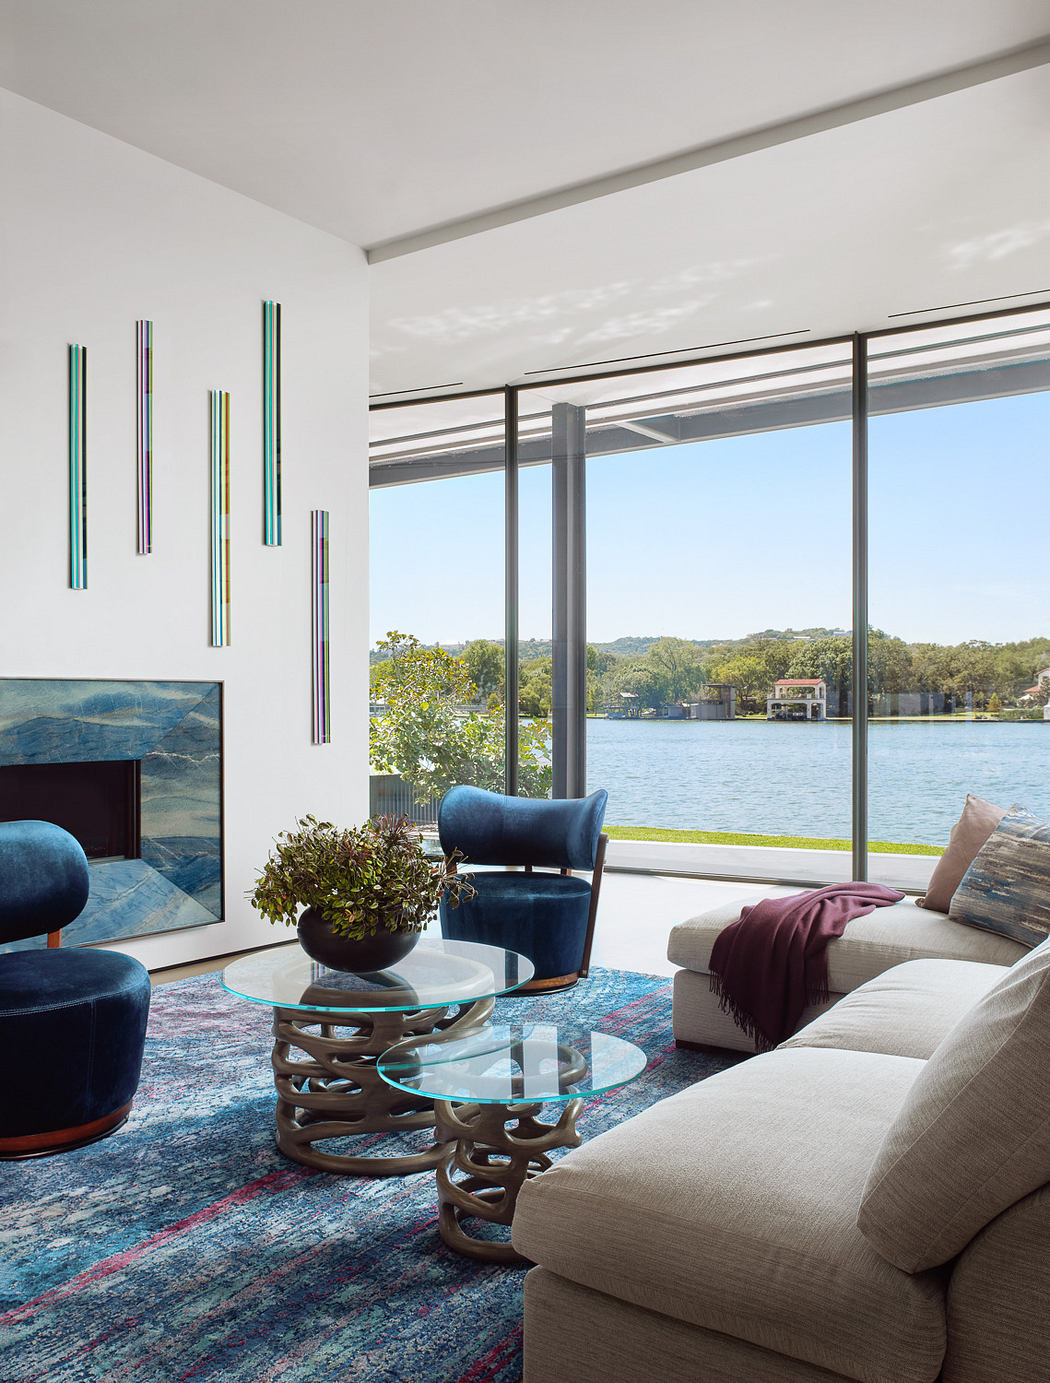 Modern living room with large window overlooking a lake.